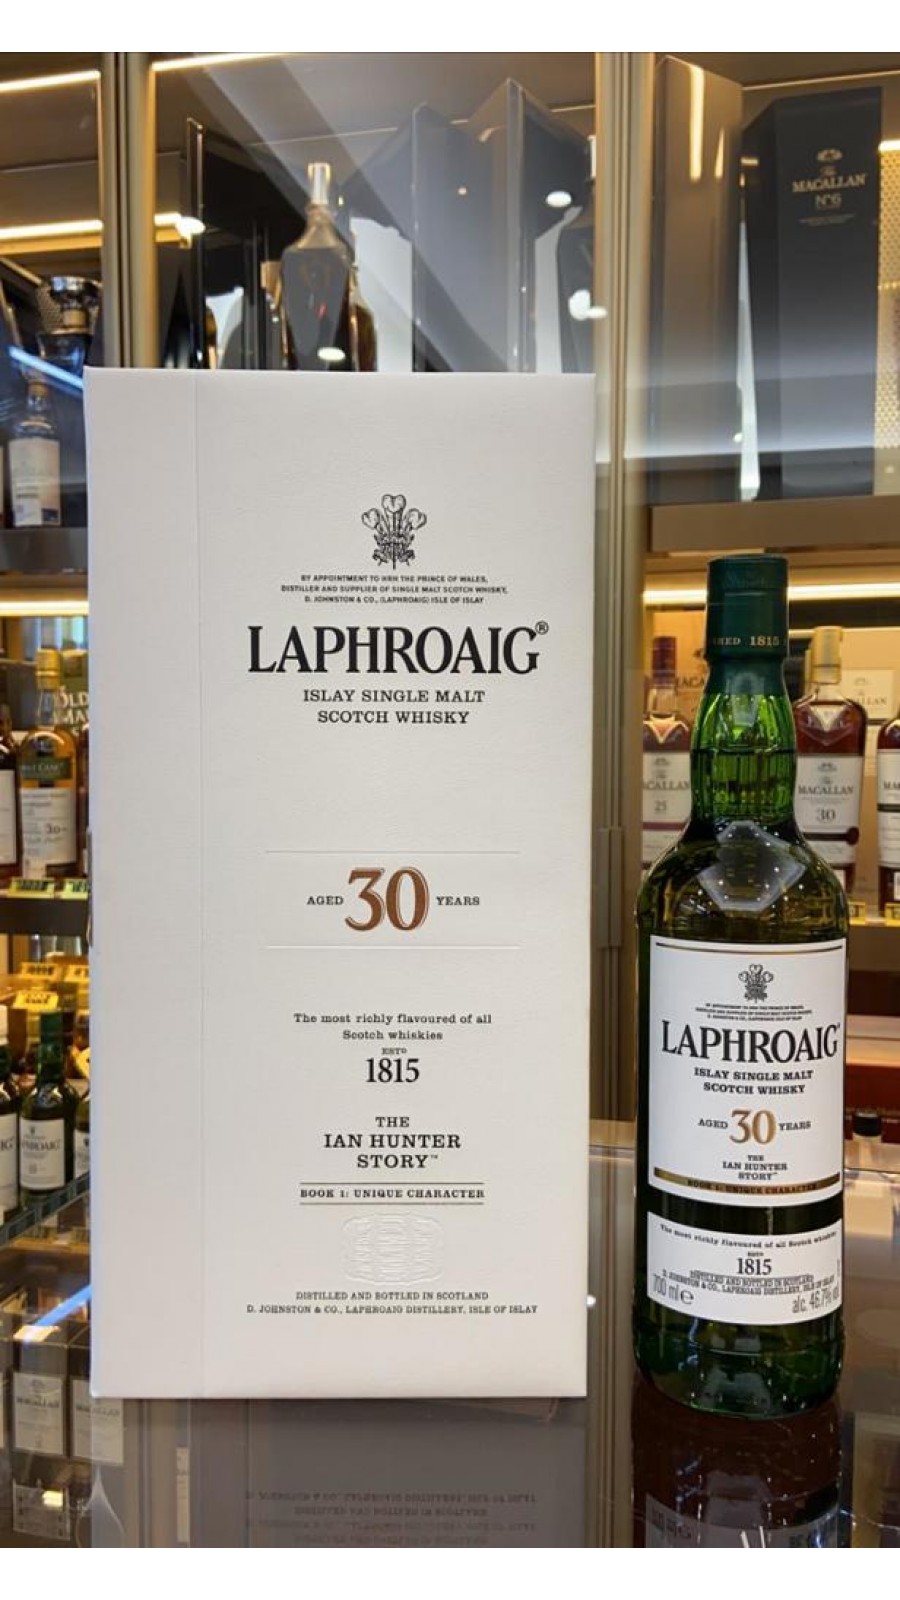 Laphroaig 30 Year Old - The Ian Hunter Story Book 1: Unique Character (70cl, 46.7%)